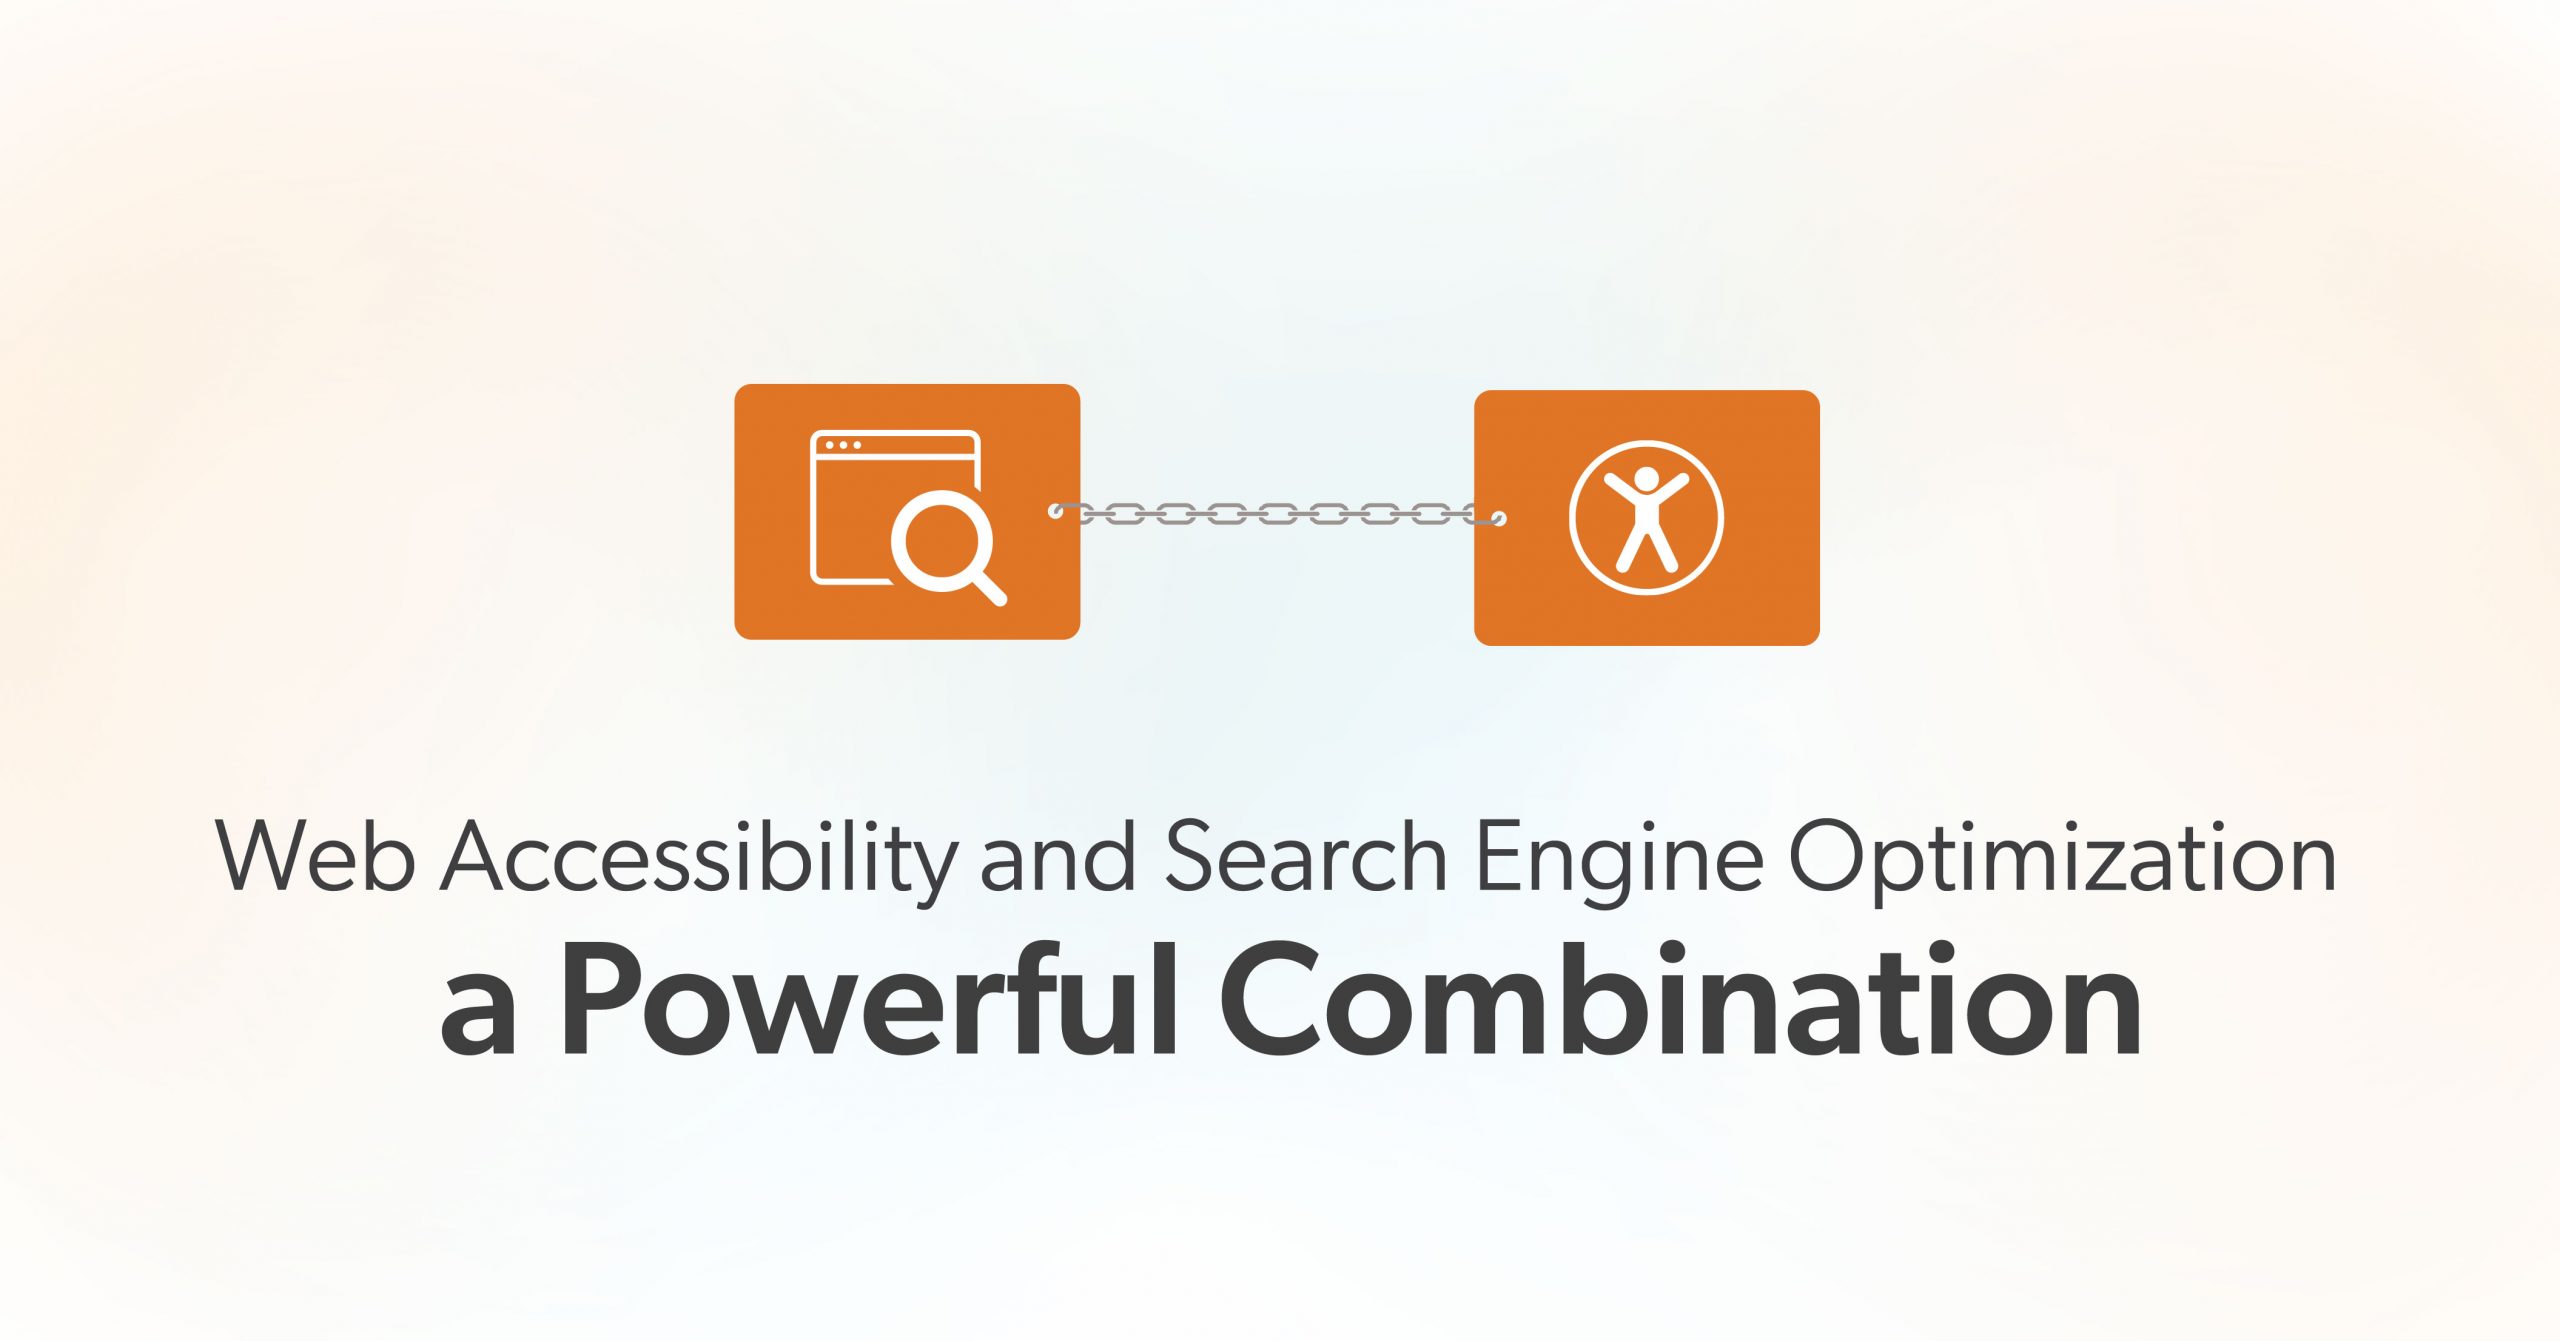 Web Accessibility and Search Engine Optimization: a Powerful Combination